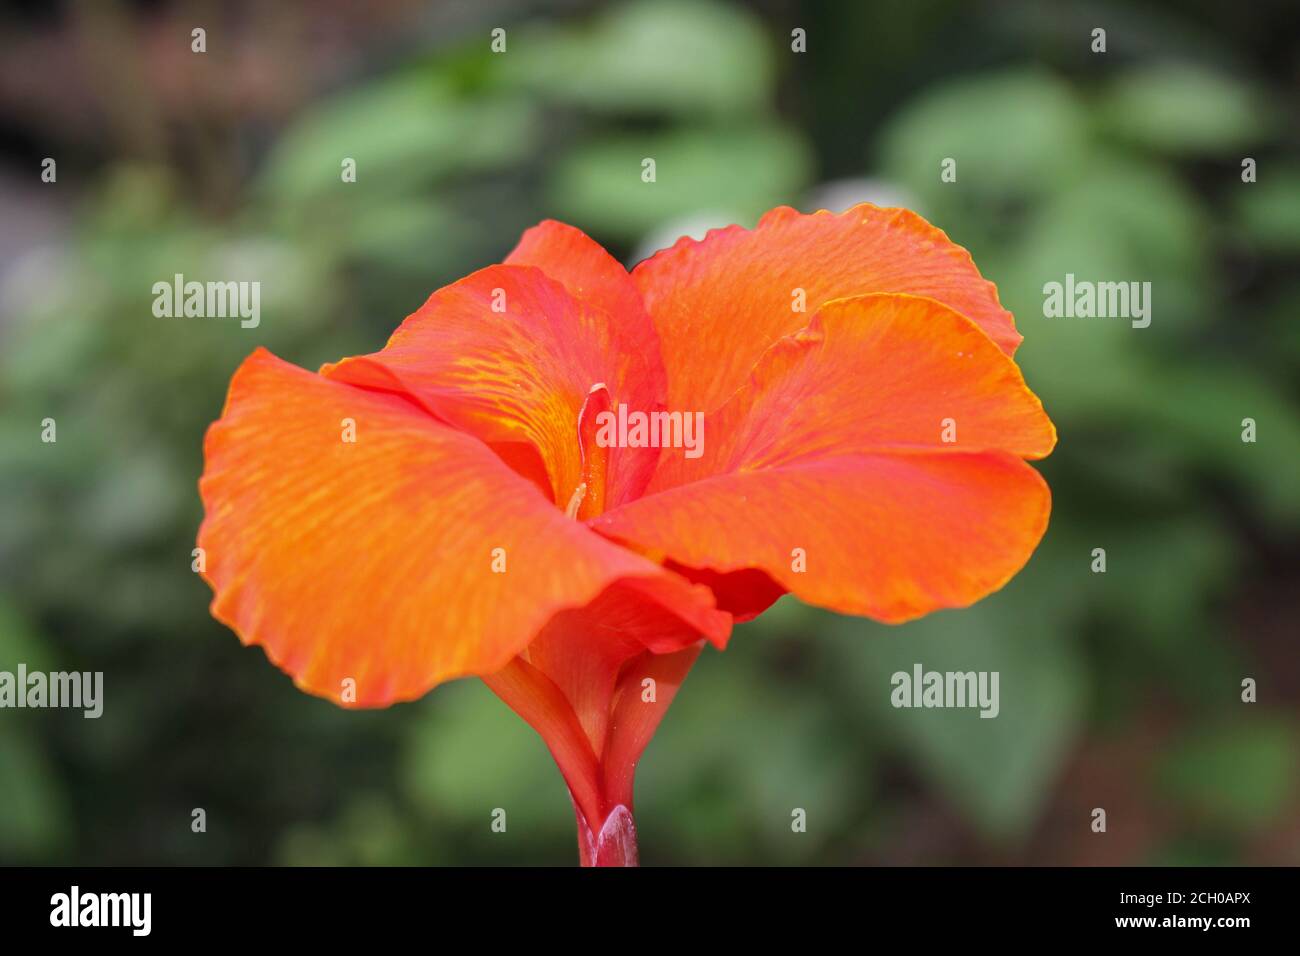 red Canna flowers background asia flower image Stock Photo